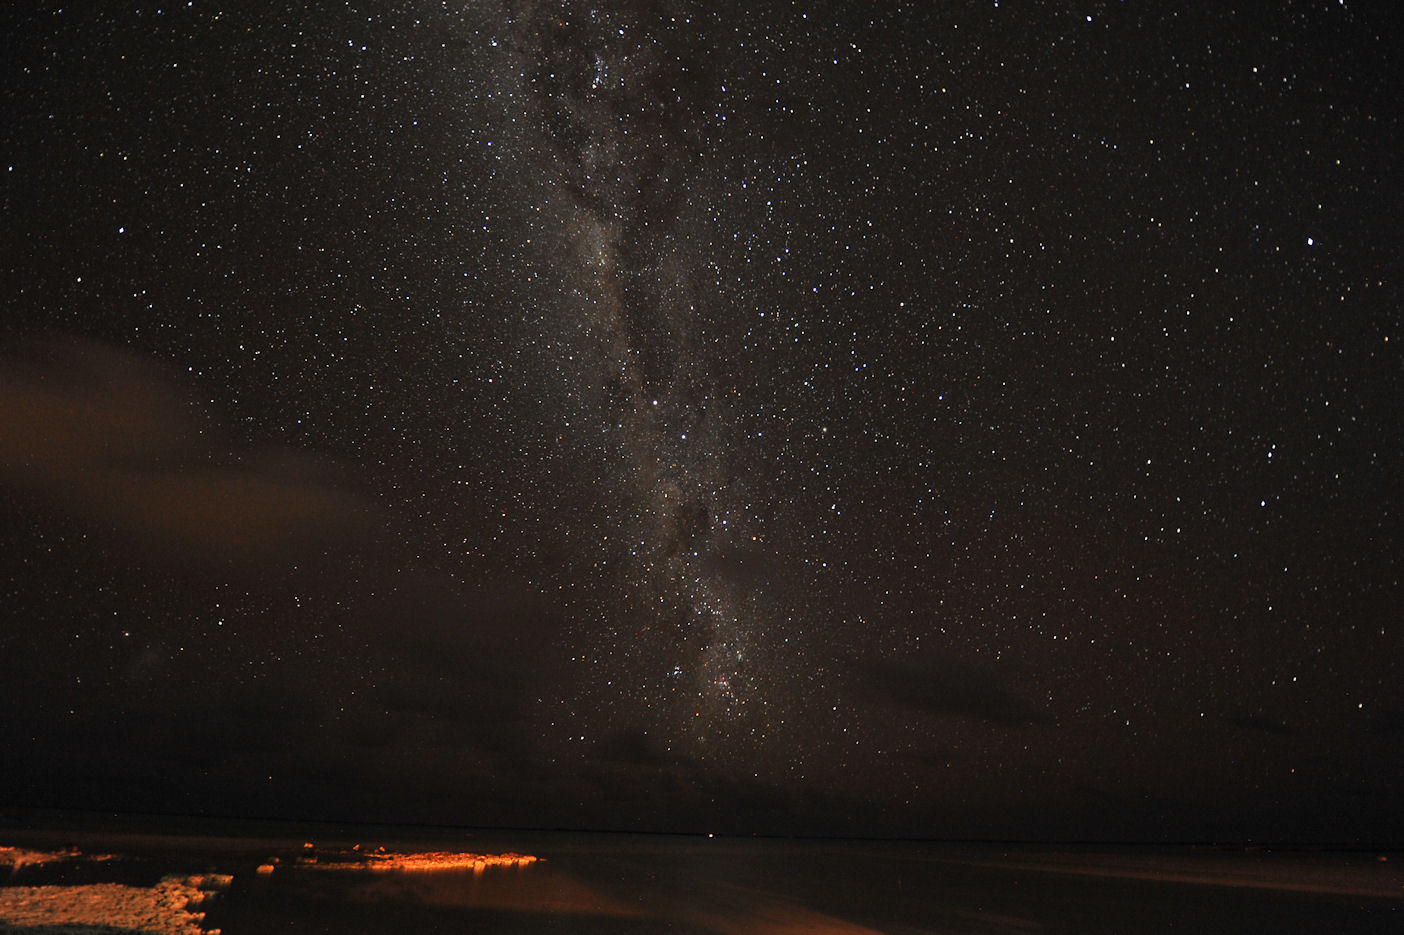 July Milkyway from the Anaa atoll